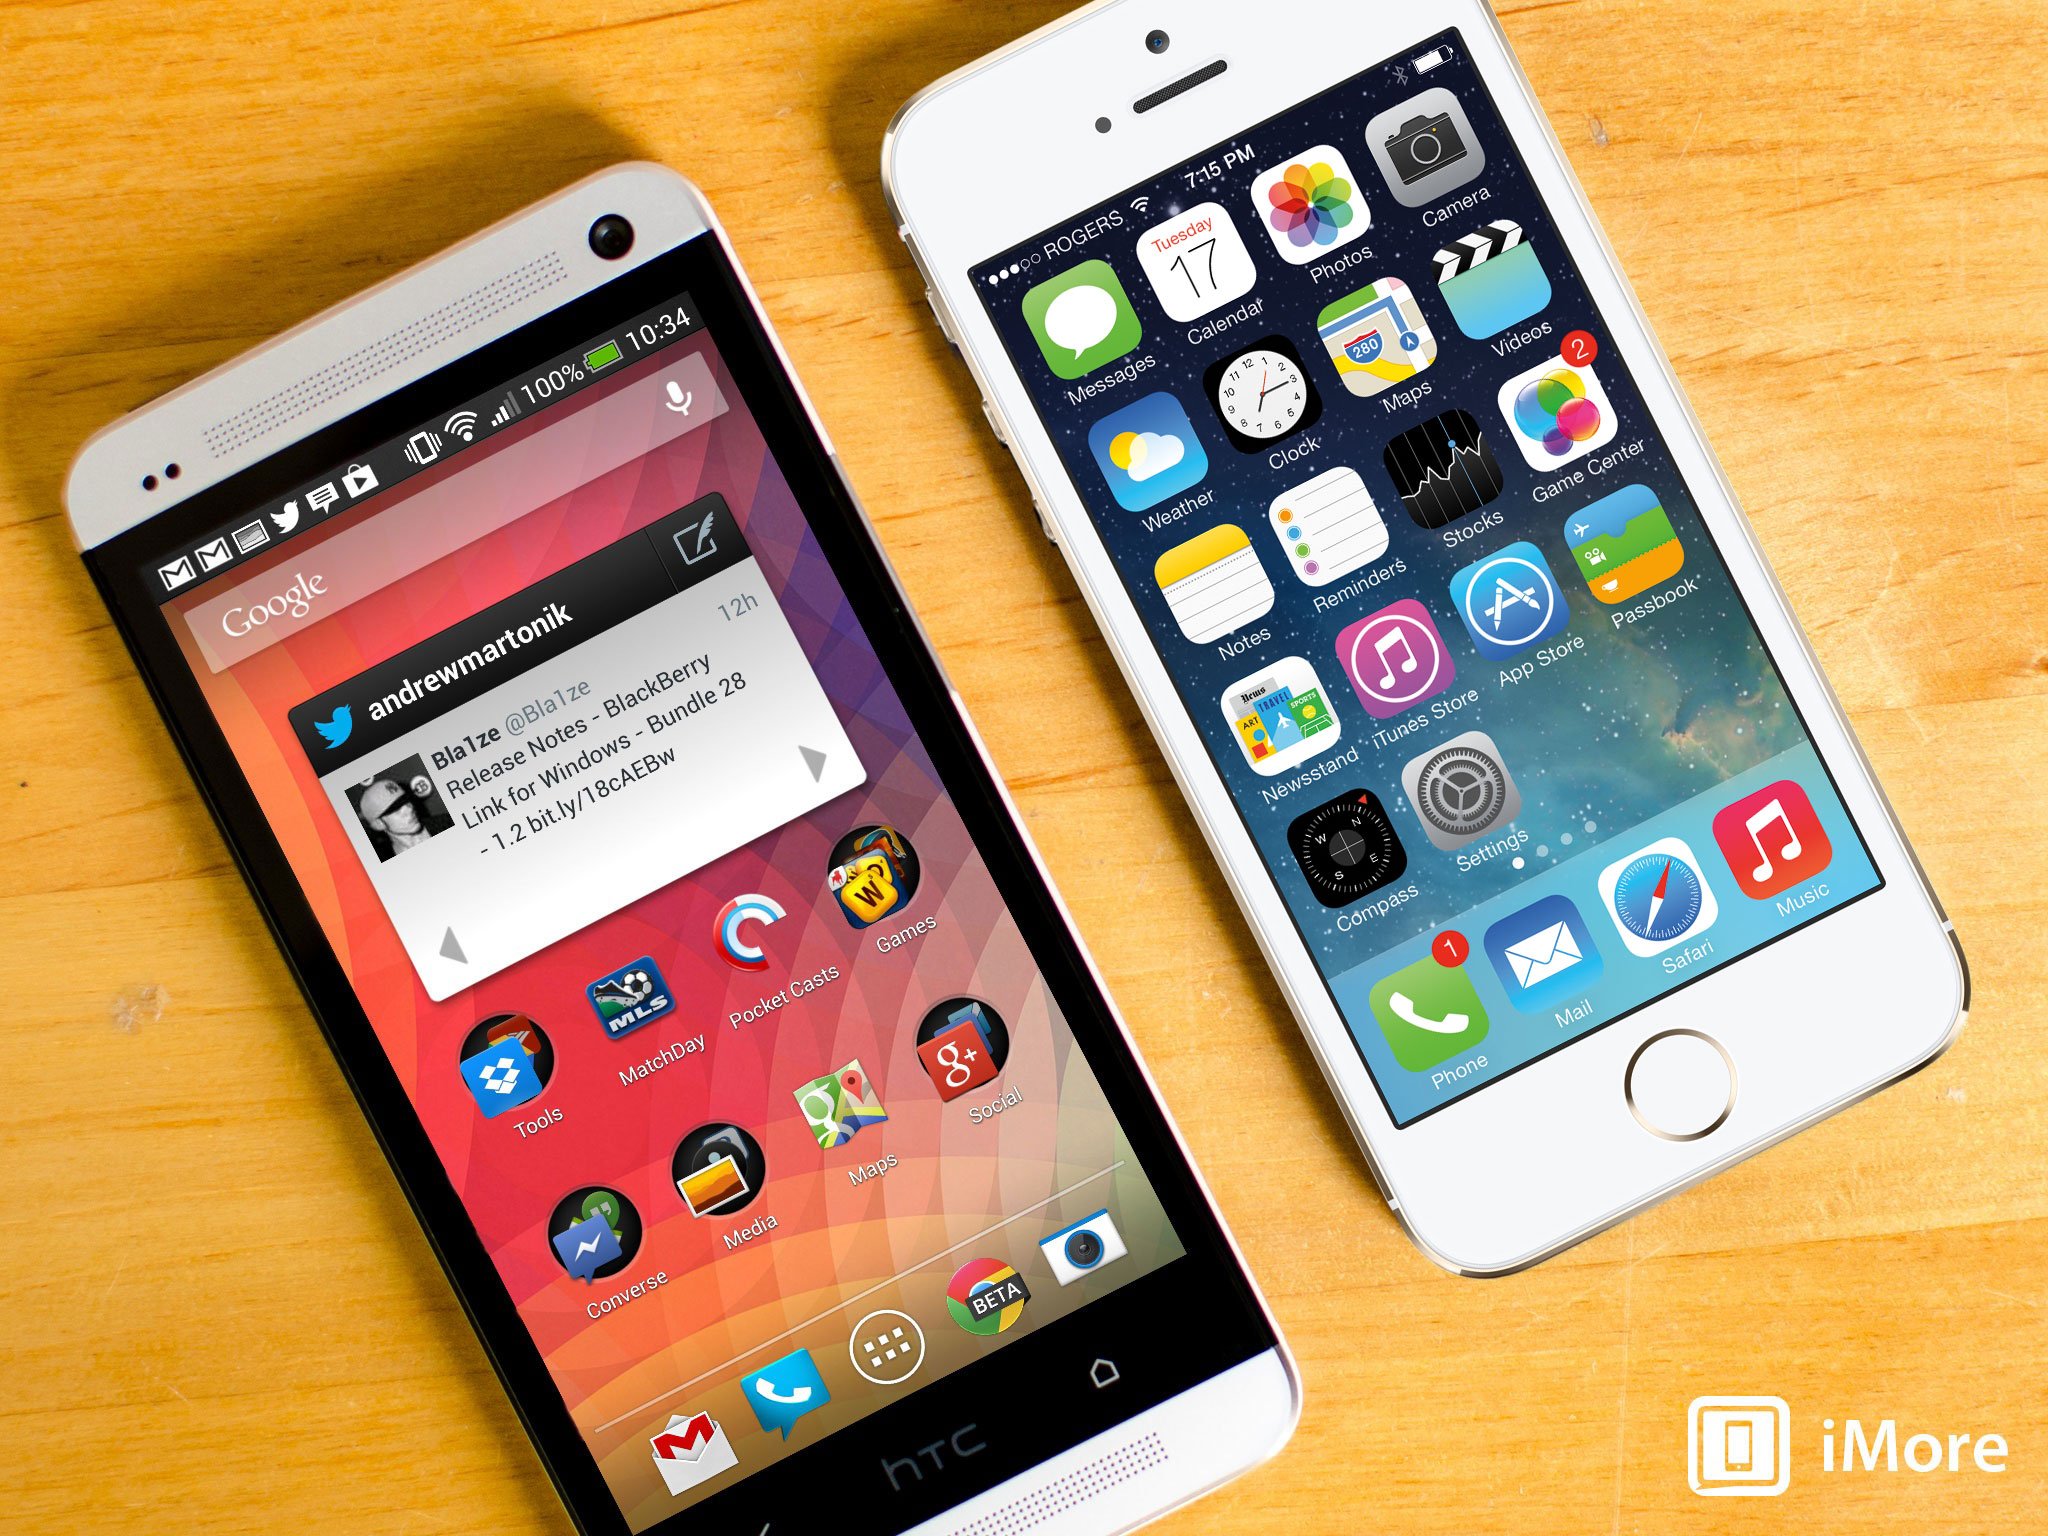 What's your perfect iPhone 6 screen size? Find out!